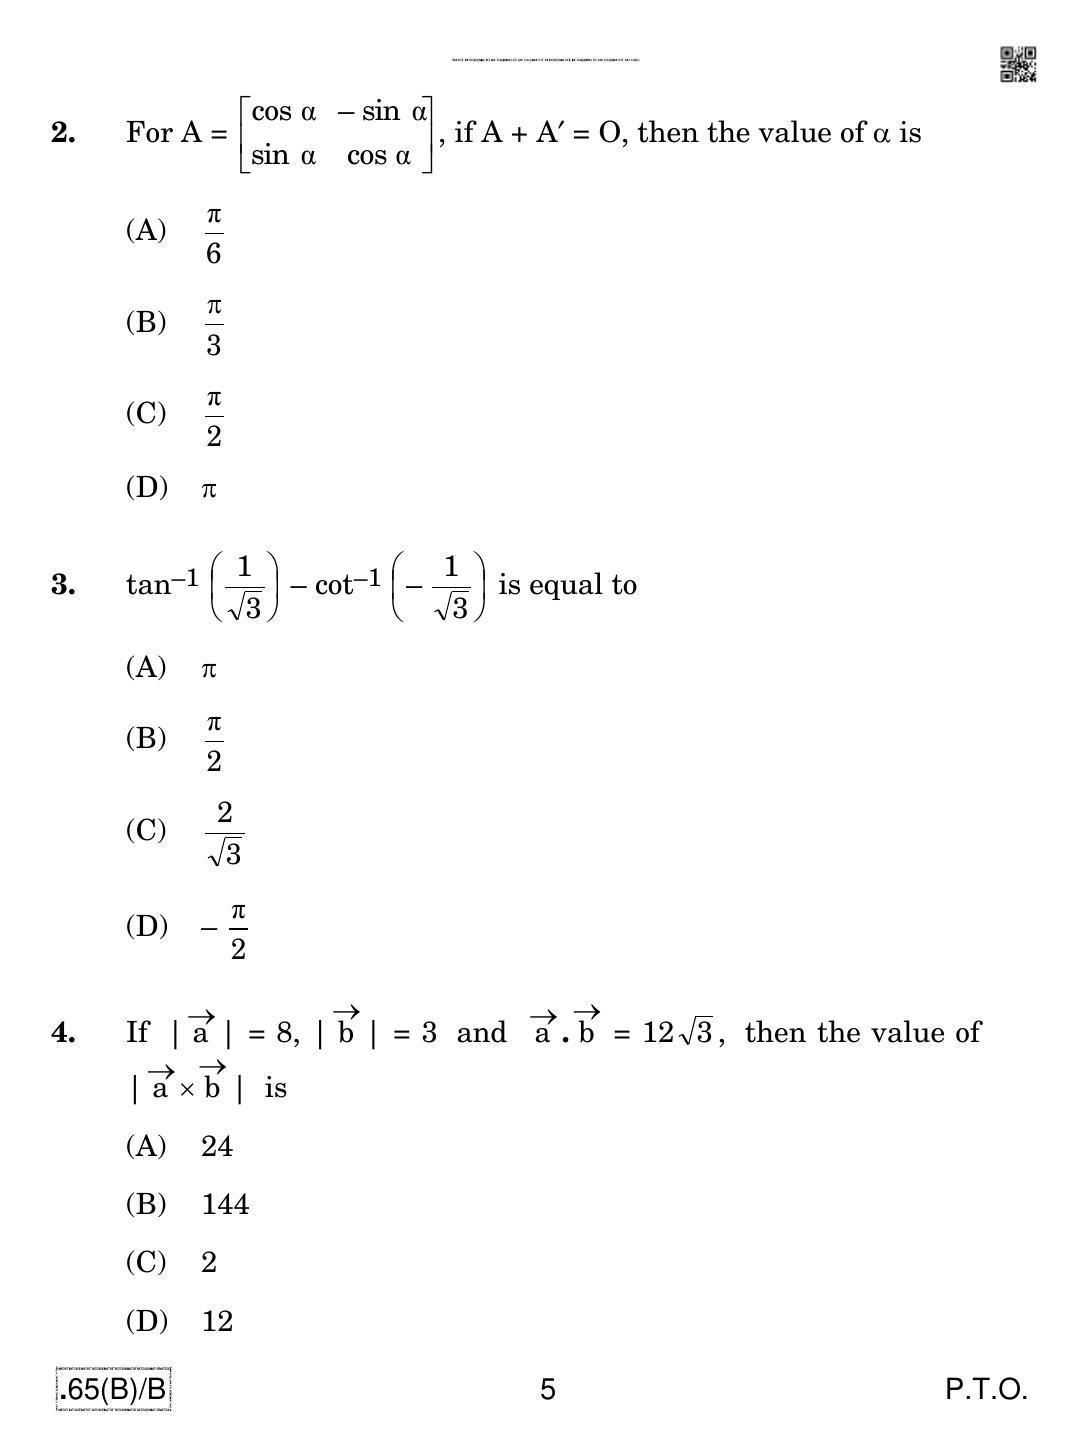 CBSE Class 12 65(B)-C - Maths For Blind Candidates 2020 Compartment Question Paper - Page 5